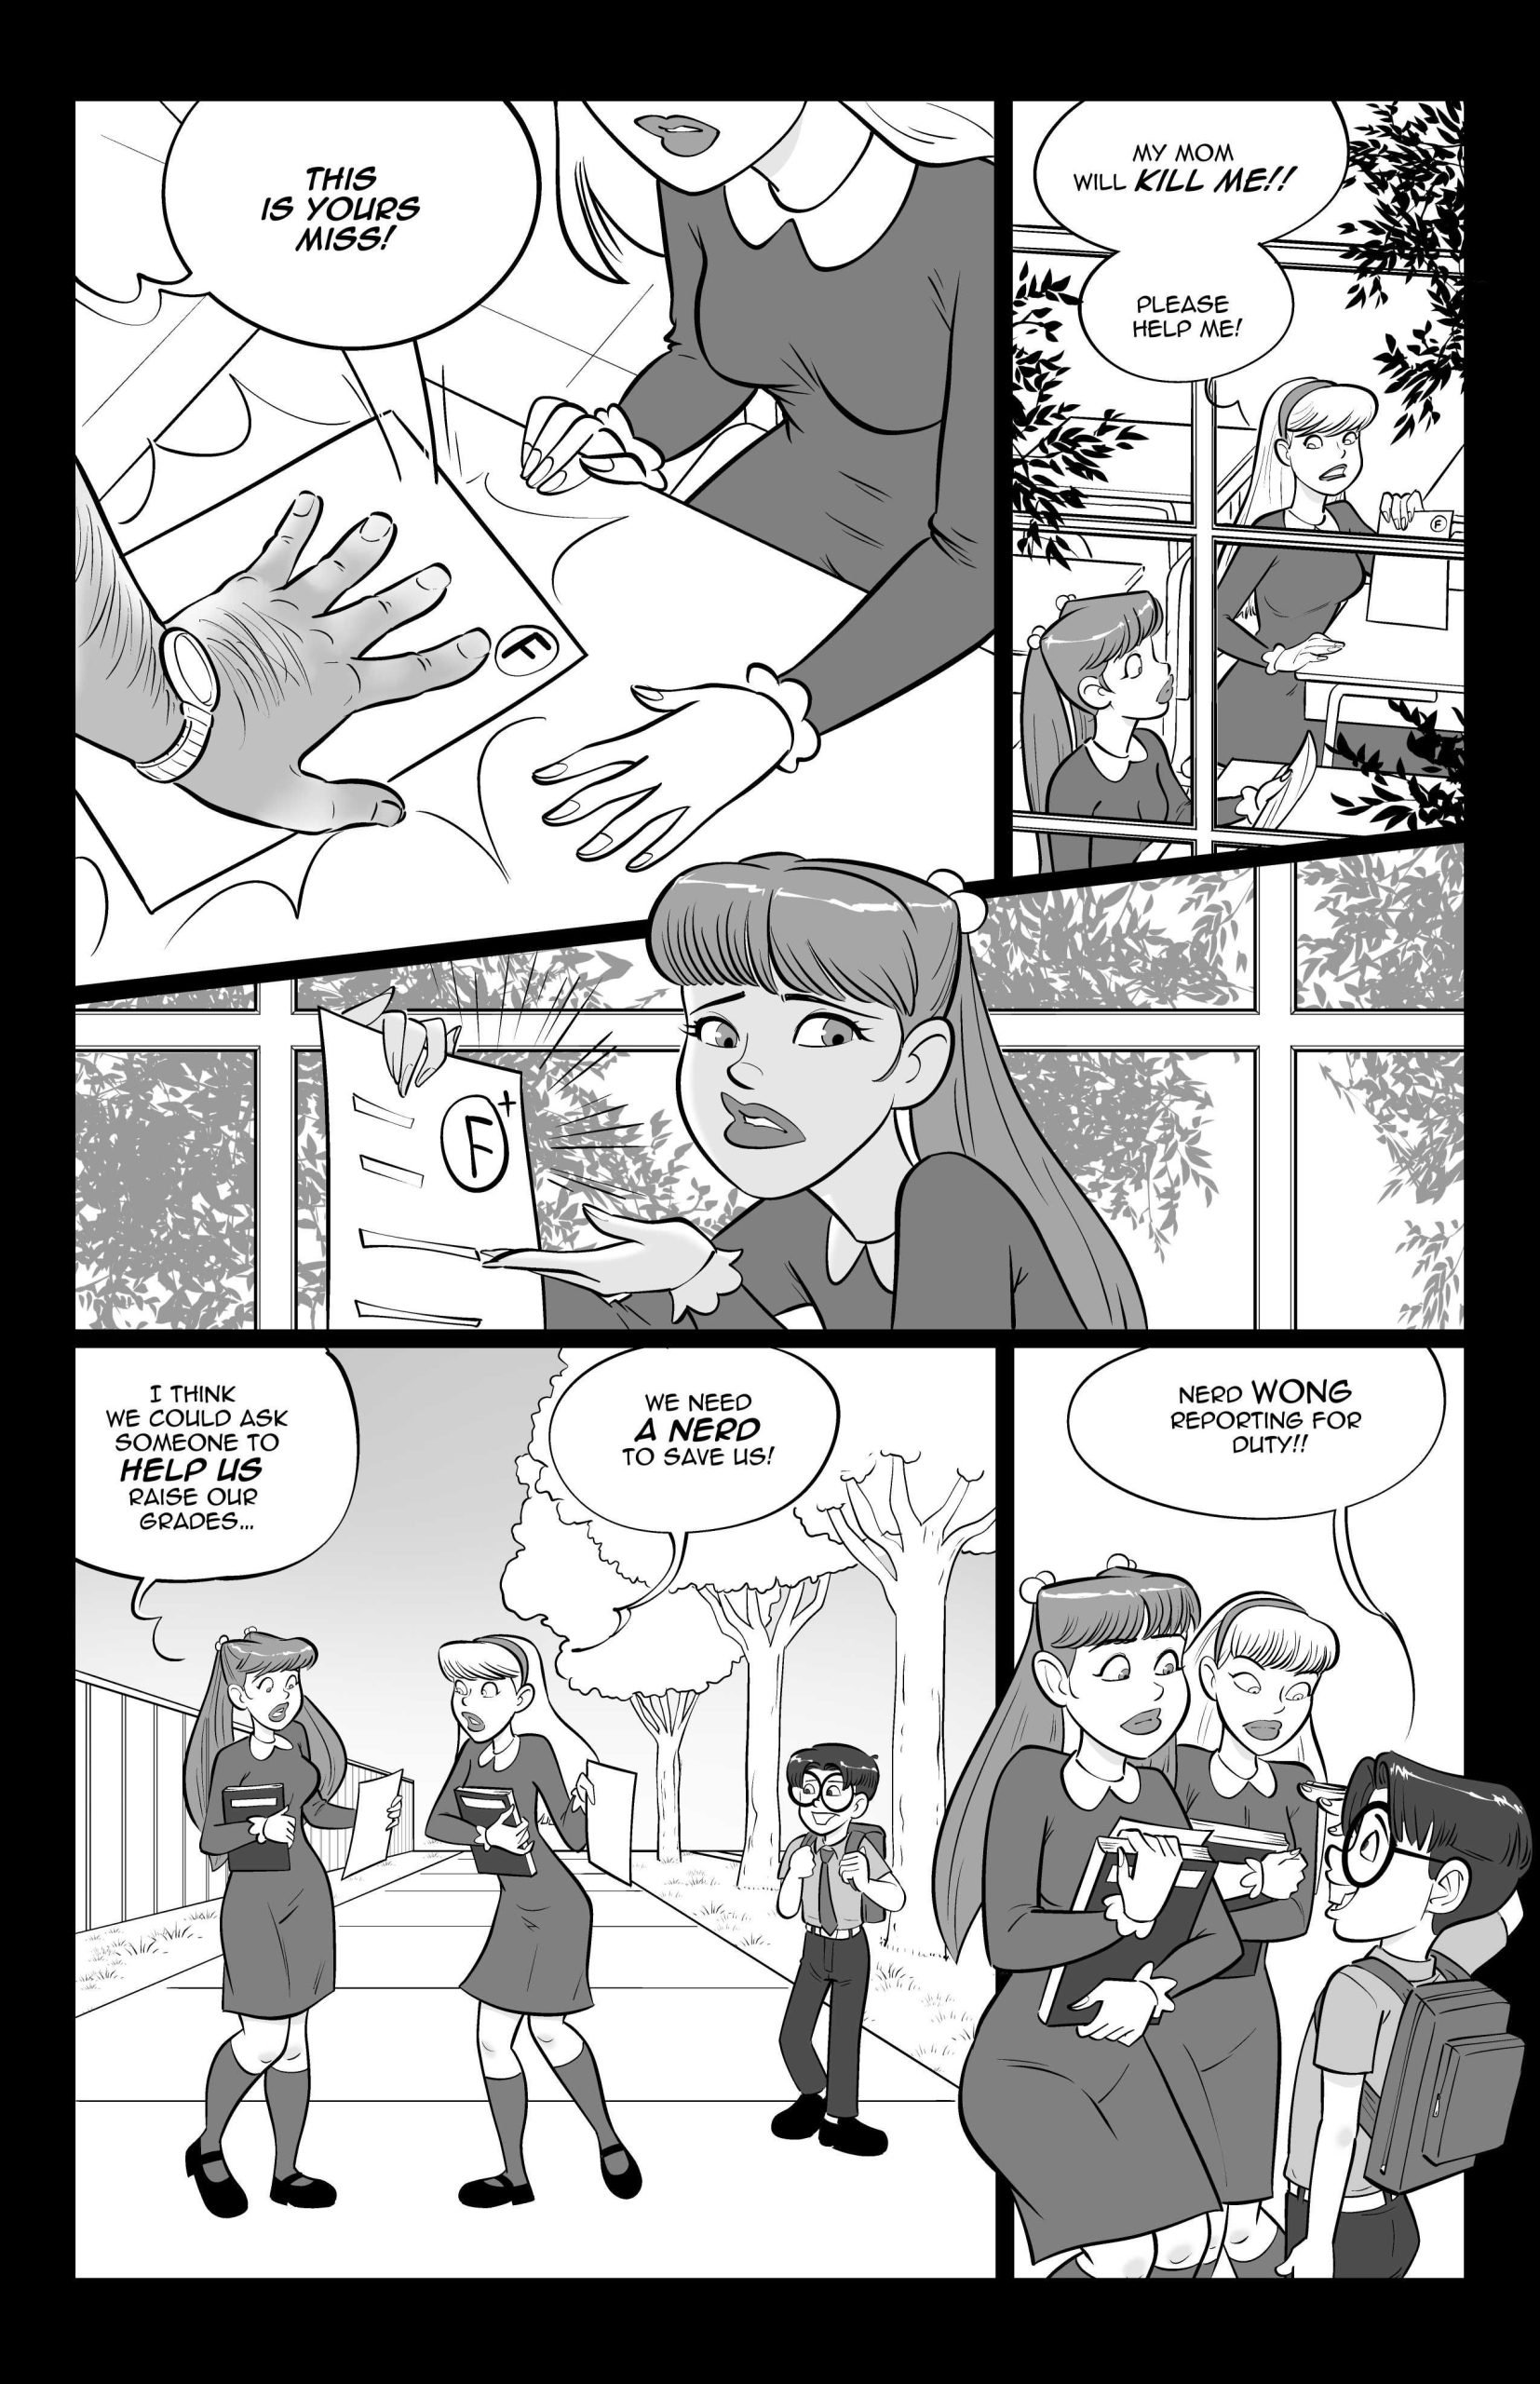 Helping With Grades [Mark Kleanup] - 1 . Helping With Grades - Chapter 1  [Mark Kleanup] - AllPornComic